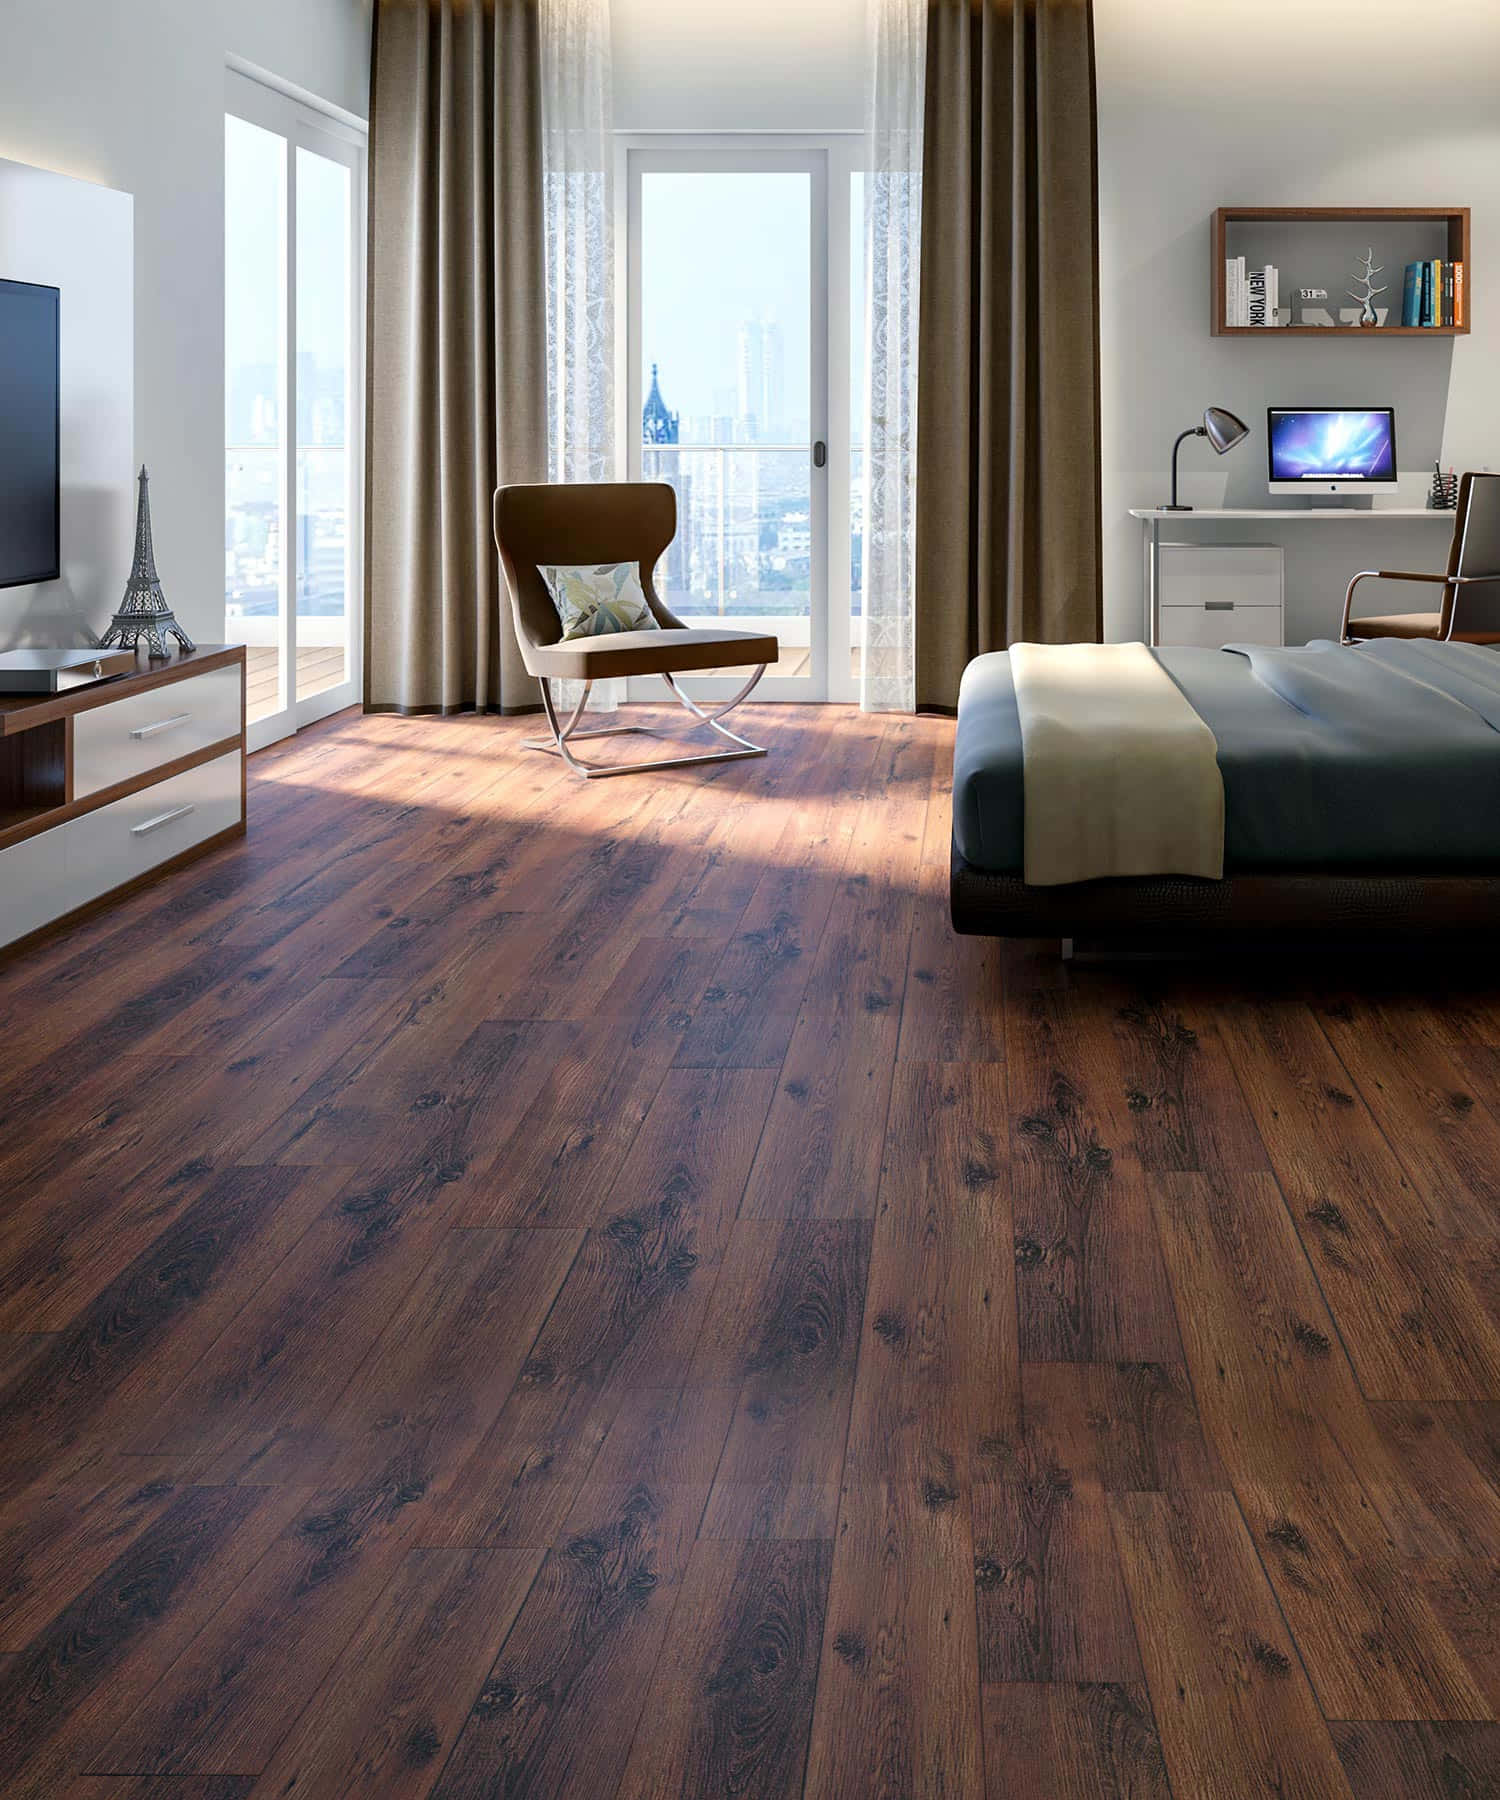 Rich and captivating, the natural beauty of wood flooring